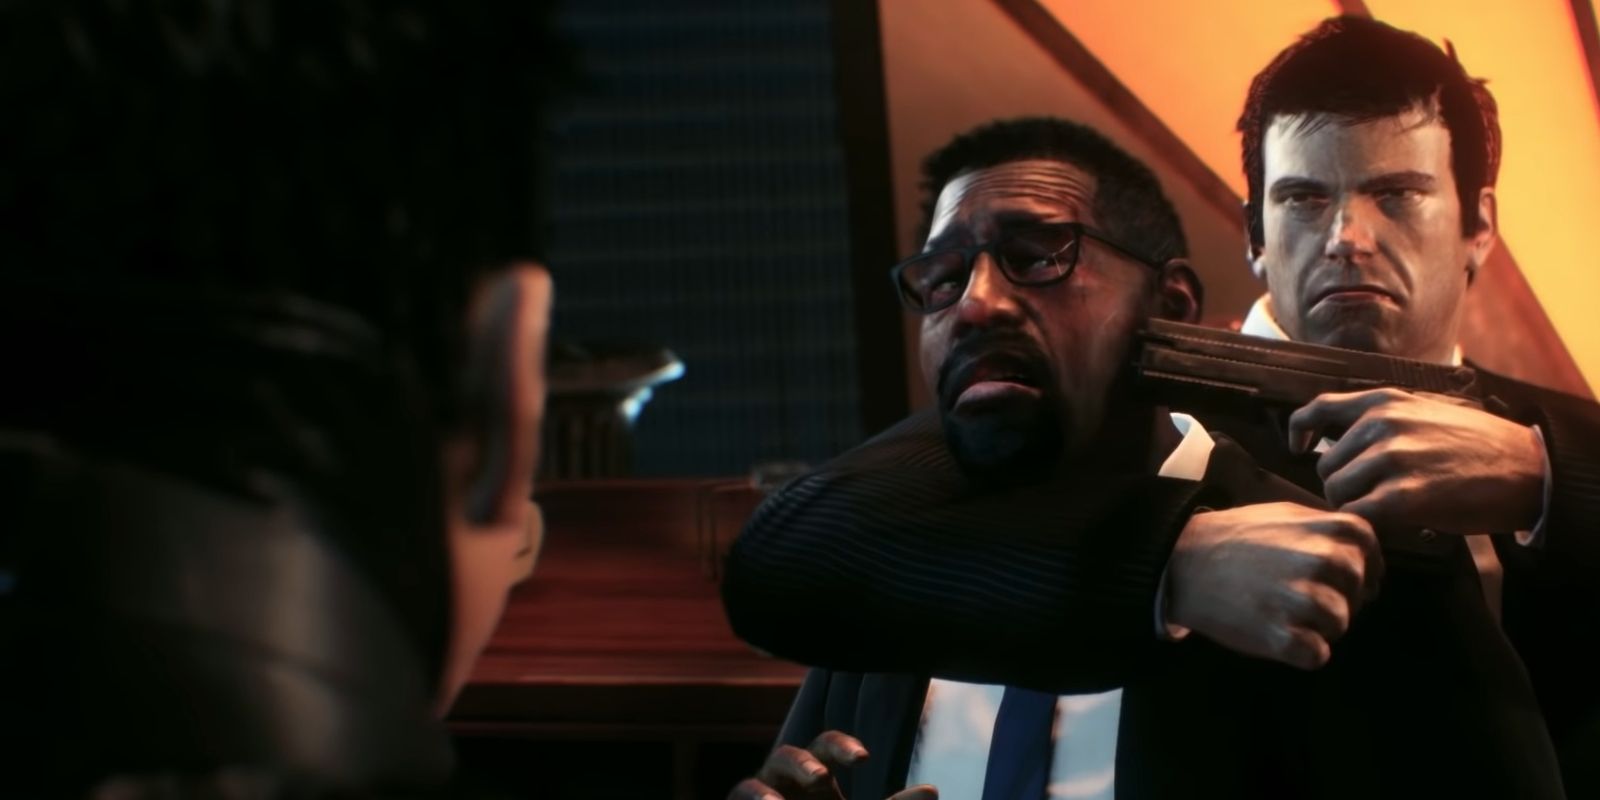 Hush holding Lucius Fox hostage while confronting Bruce Wayne in Batman: Arkham Knight